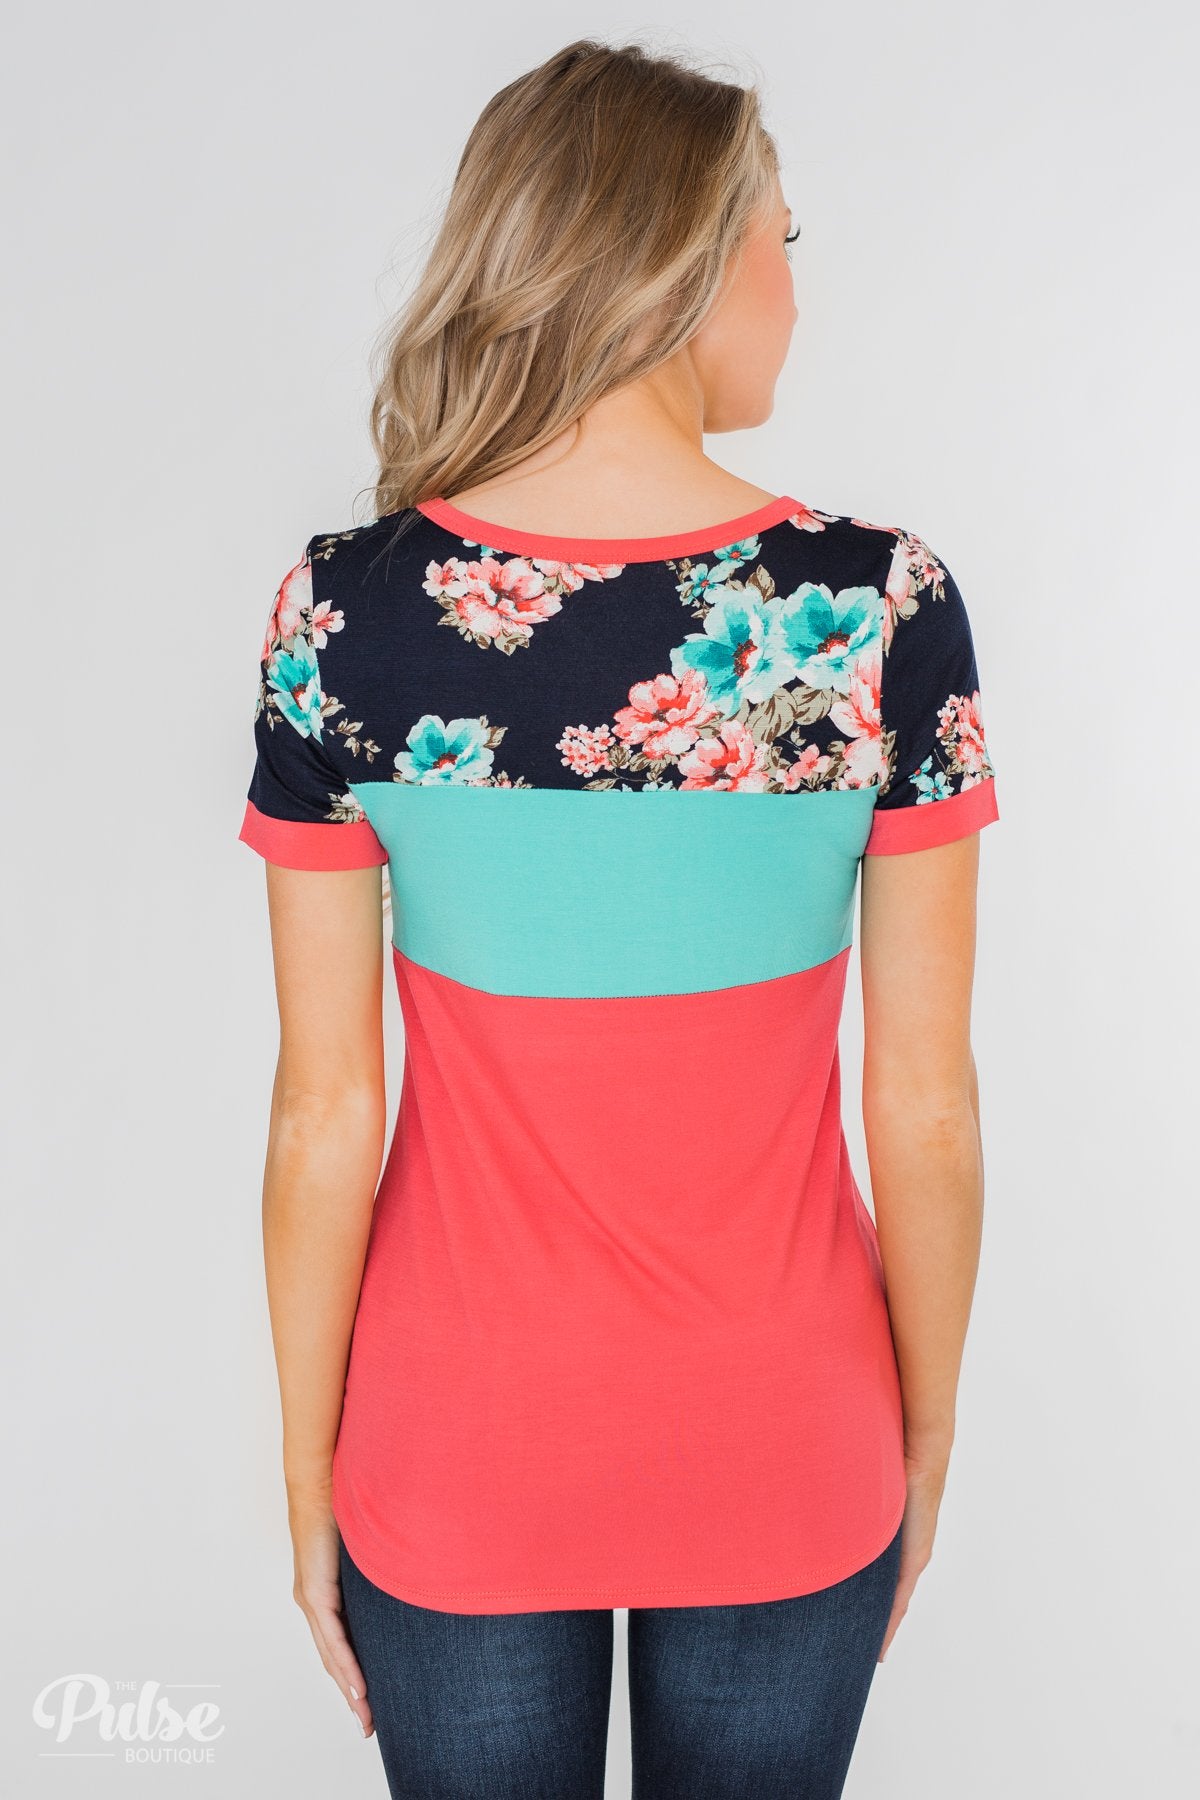 Illuminate The Room Floral Color Block Top- Dark Pink & Navy